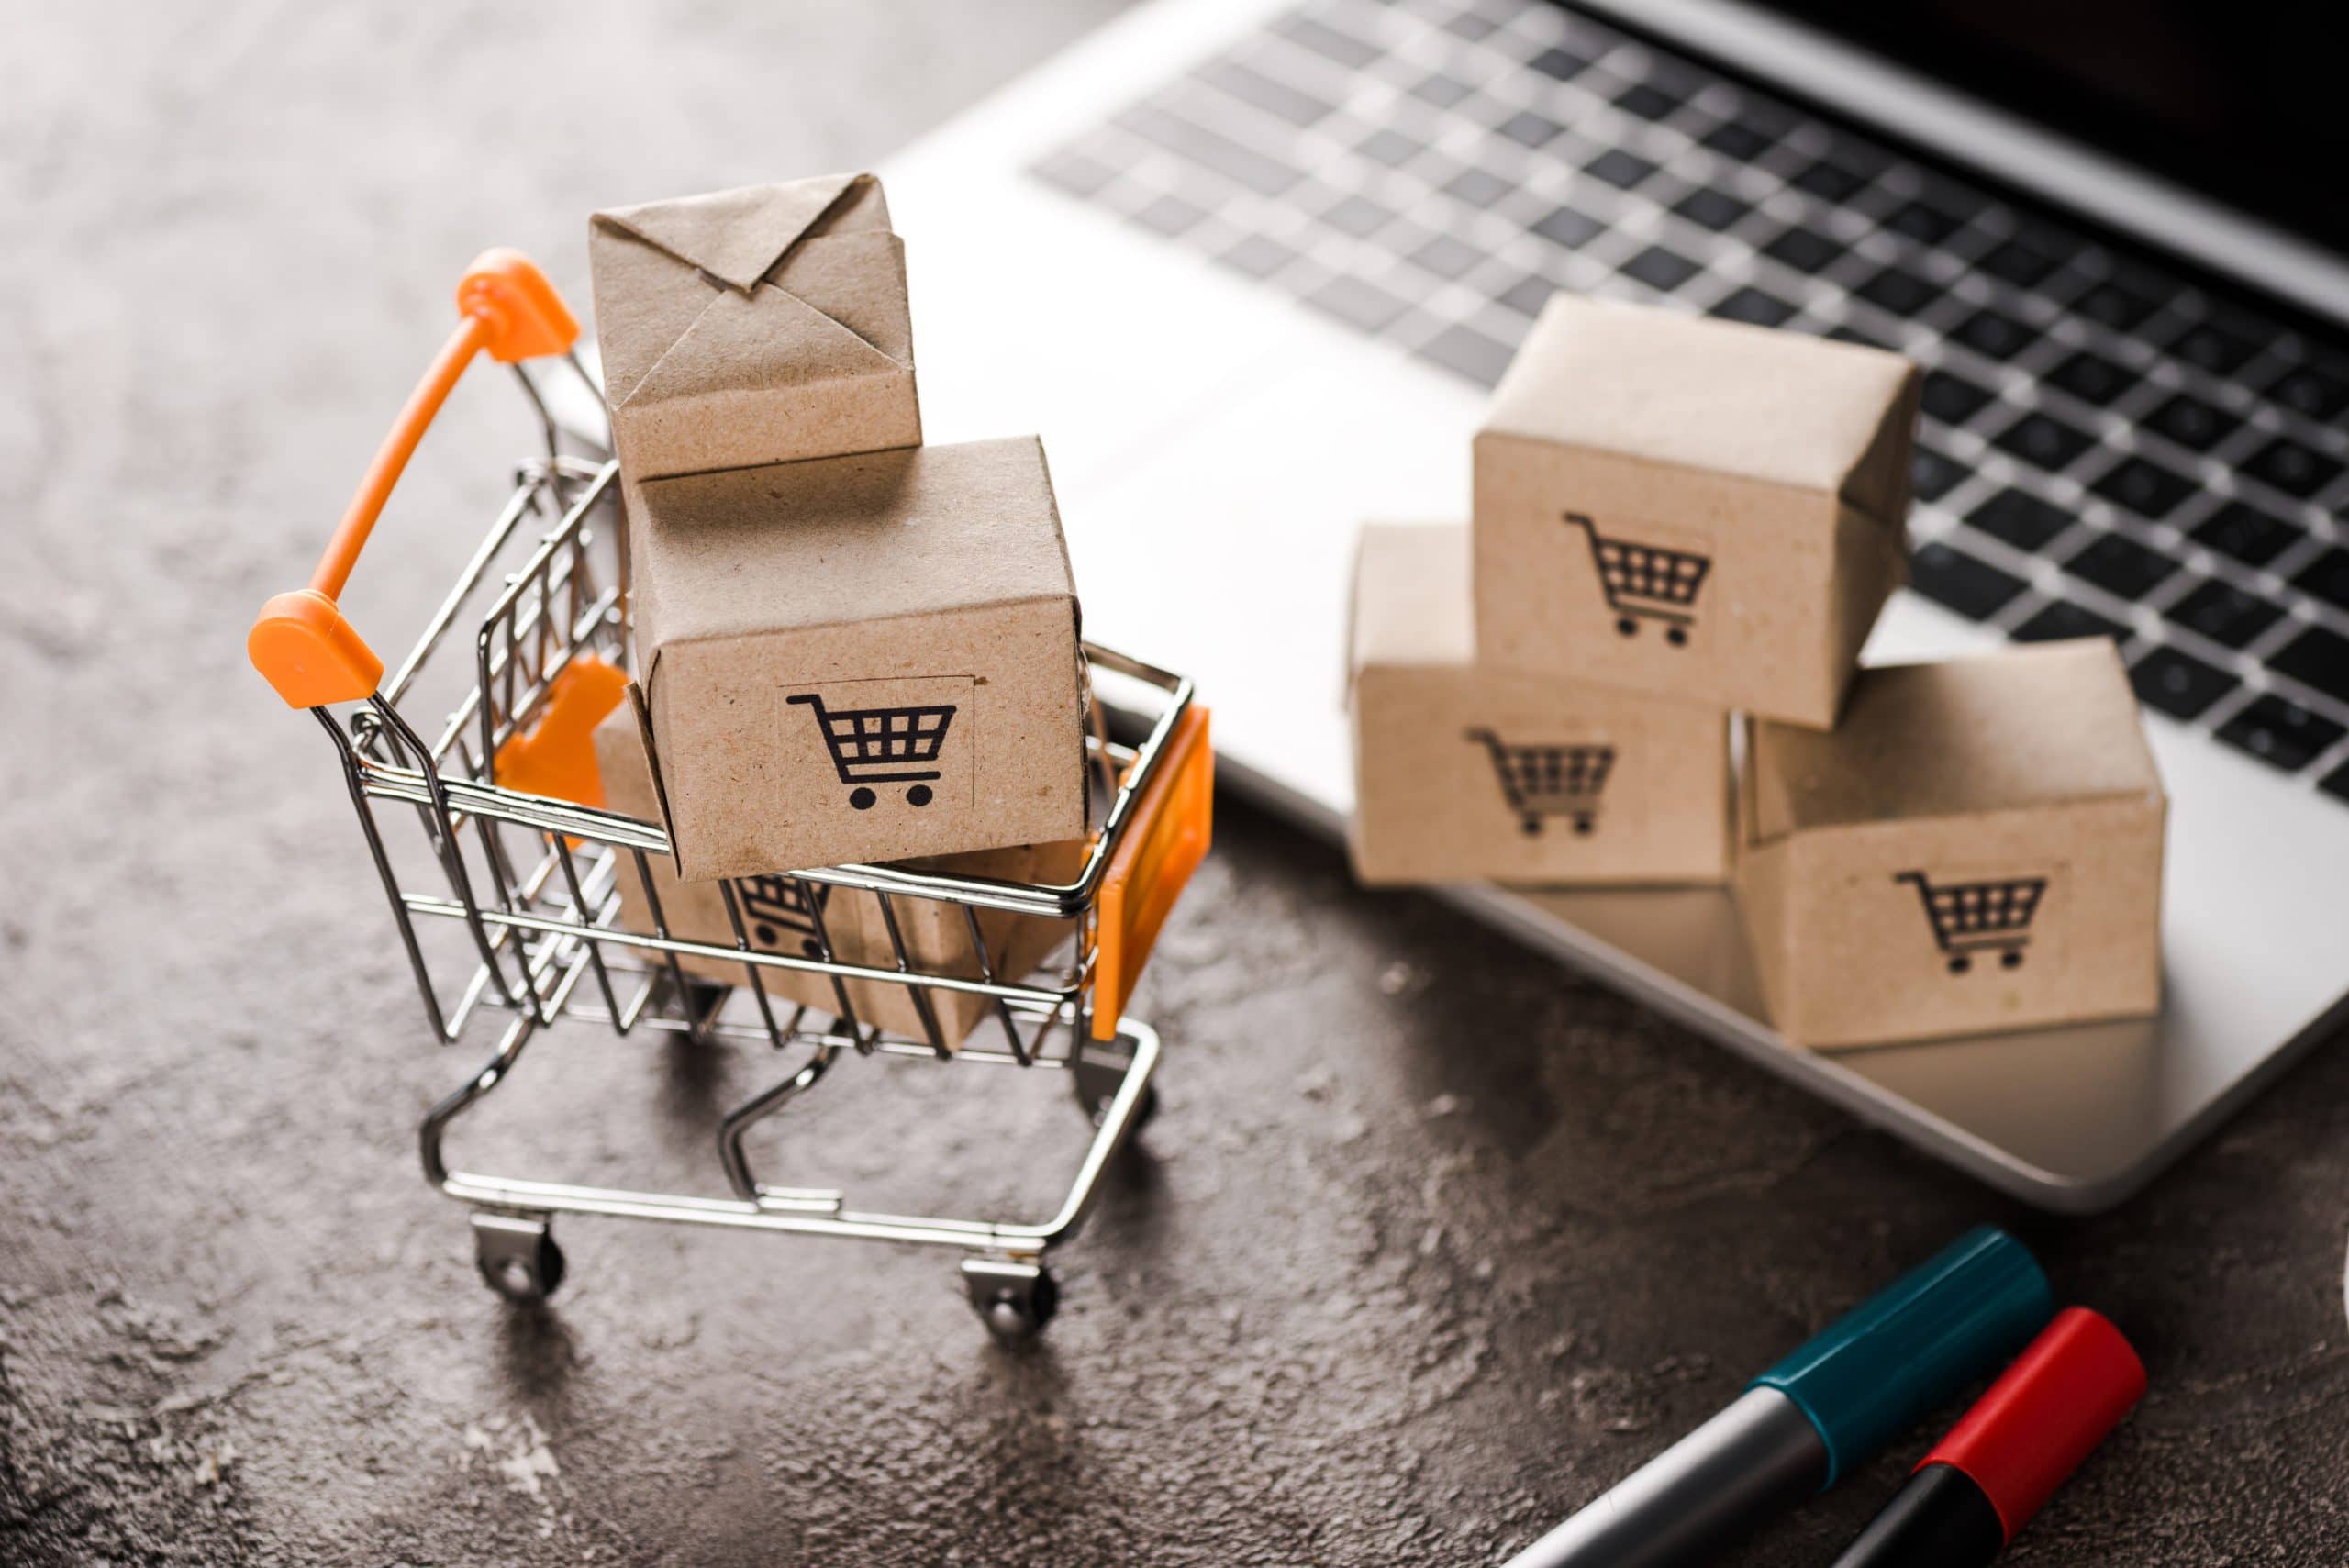 Top 10 Ecommerce Mistakes to Avoid in 2022